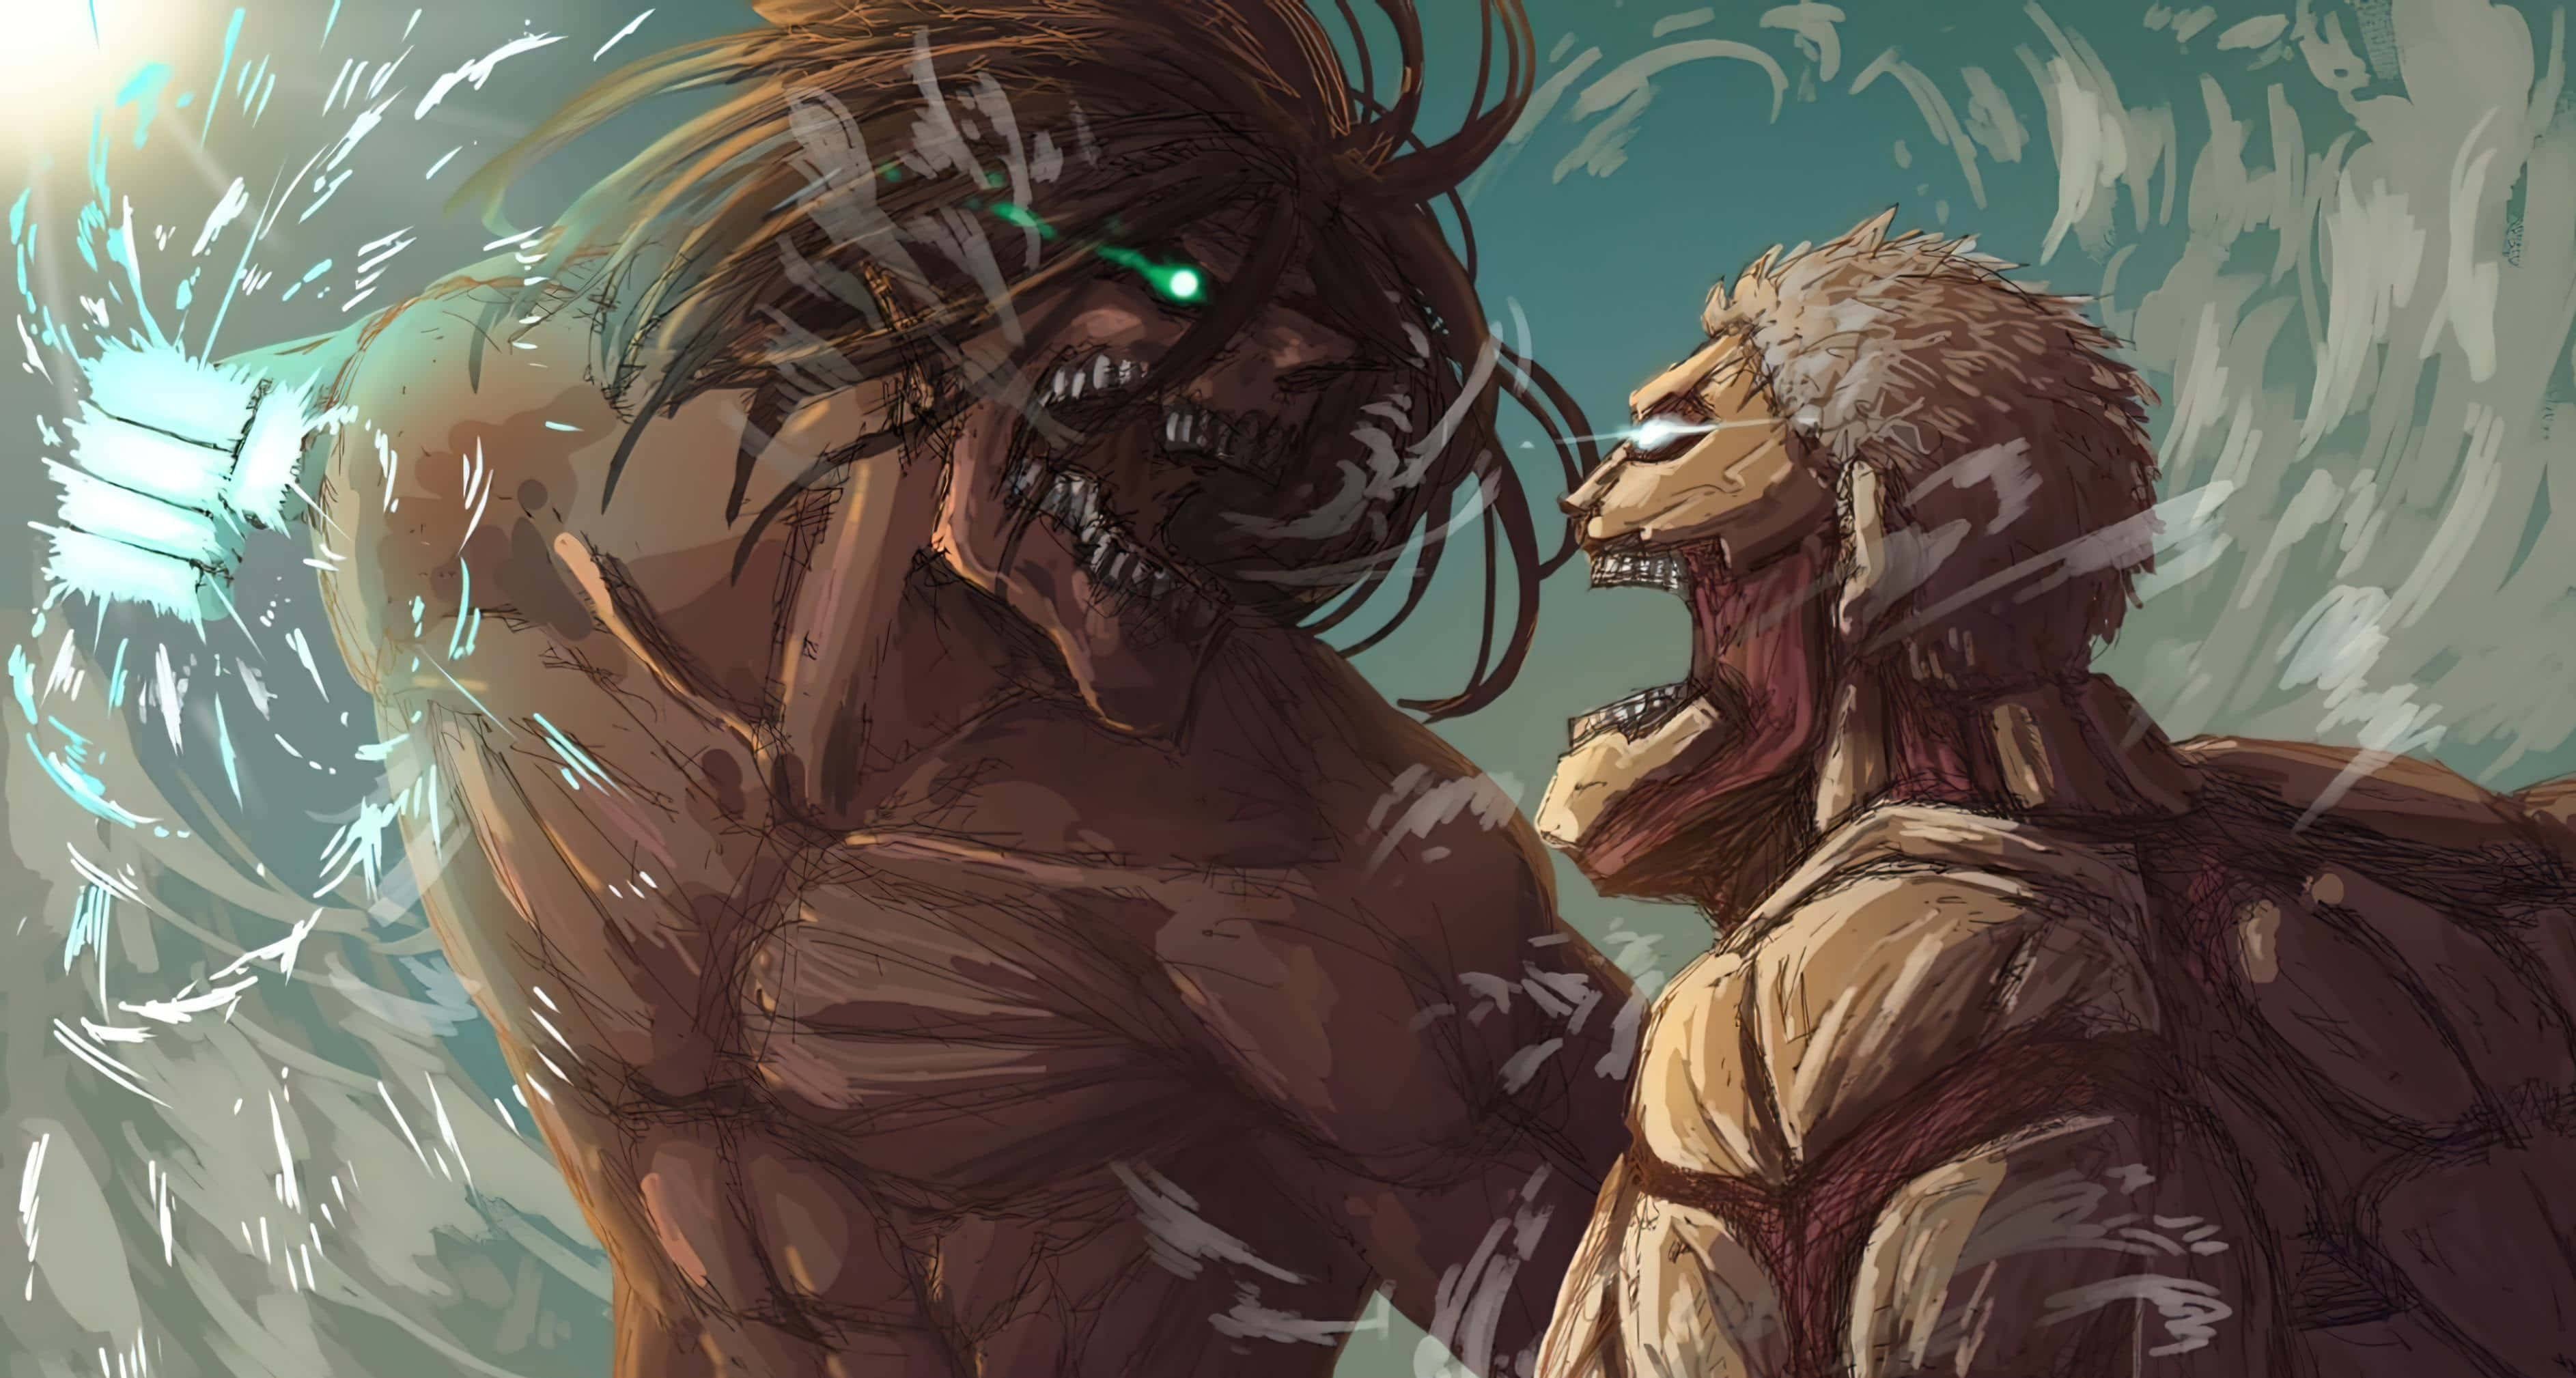 The Battle for Humanity - Armored Titan Wallpaper